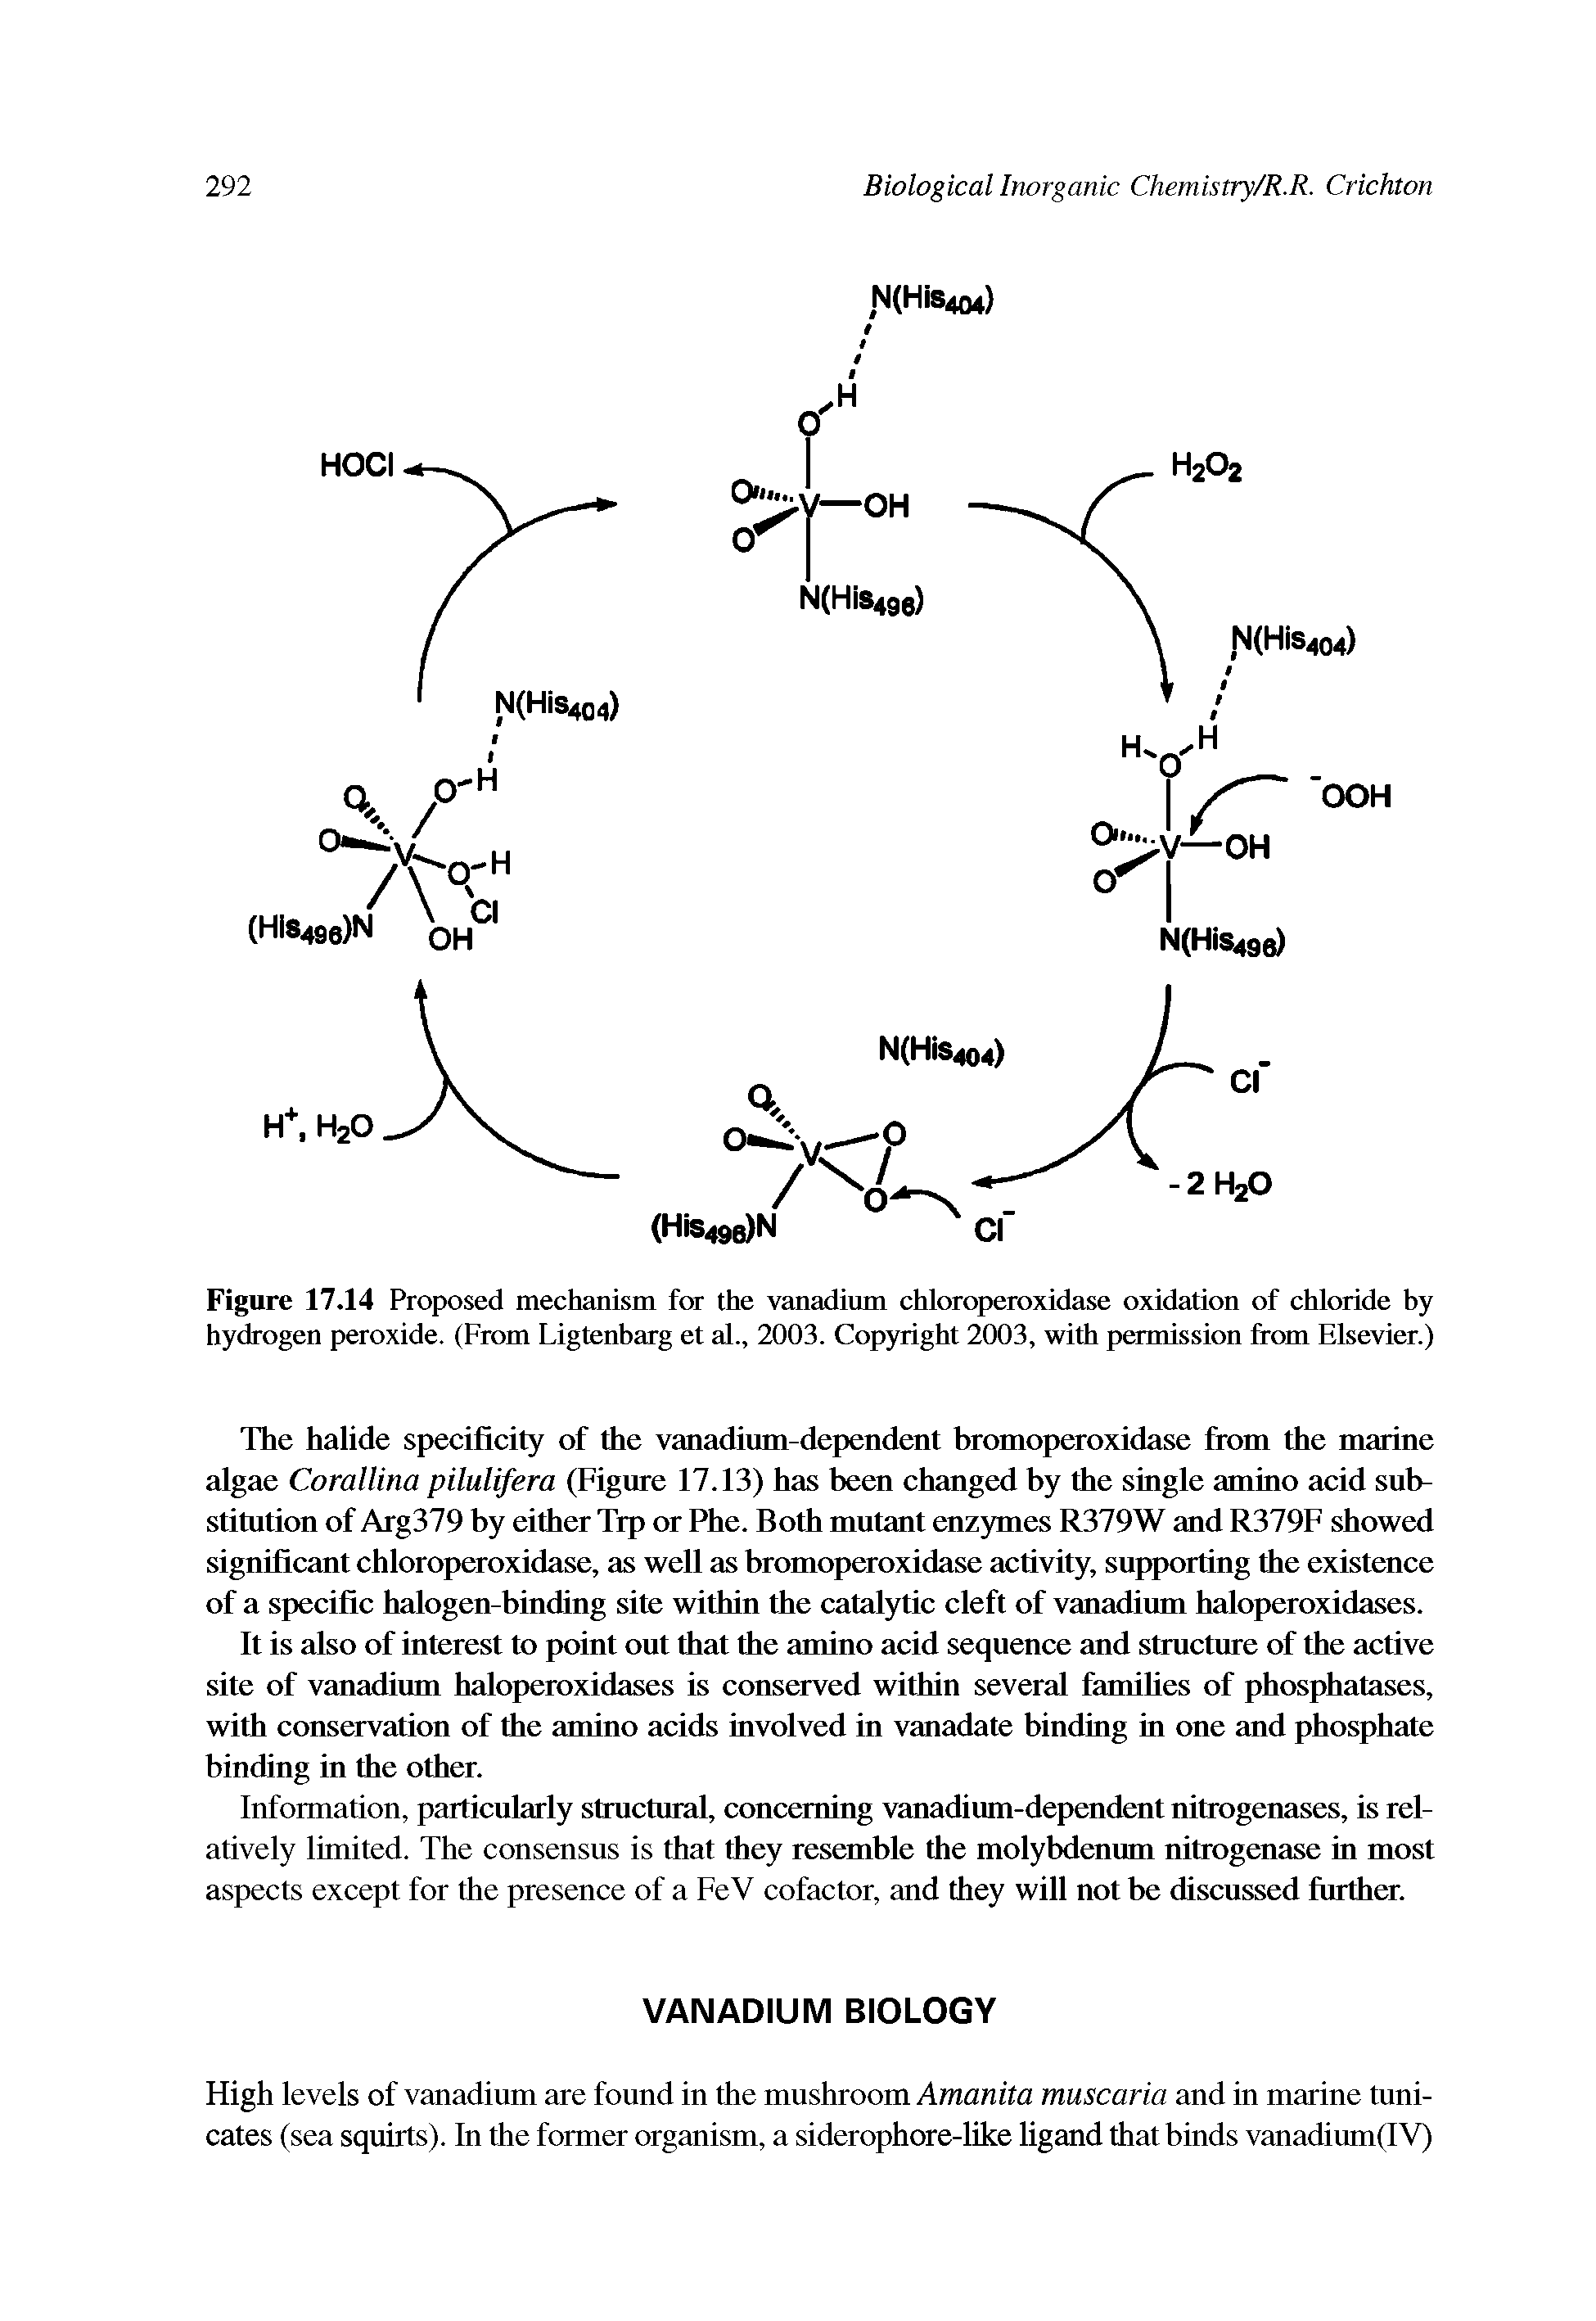 Figure 17.14 Proposed mechanism for the vanadium chloroperoxidase oxidation of chloride by hydrogen peroxide. (From Ligtenbarg et al., 2003. Copyright 2003, with permission from Elsevier.)...